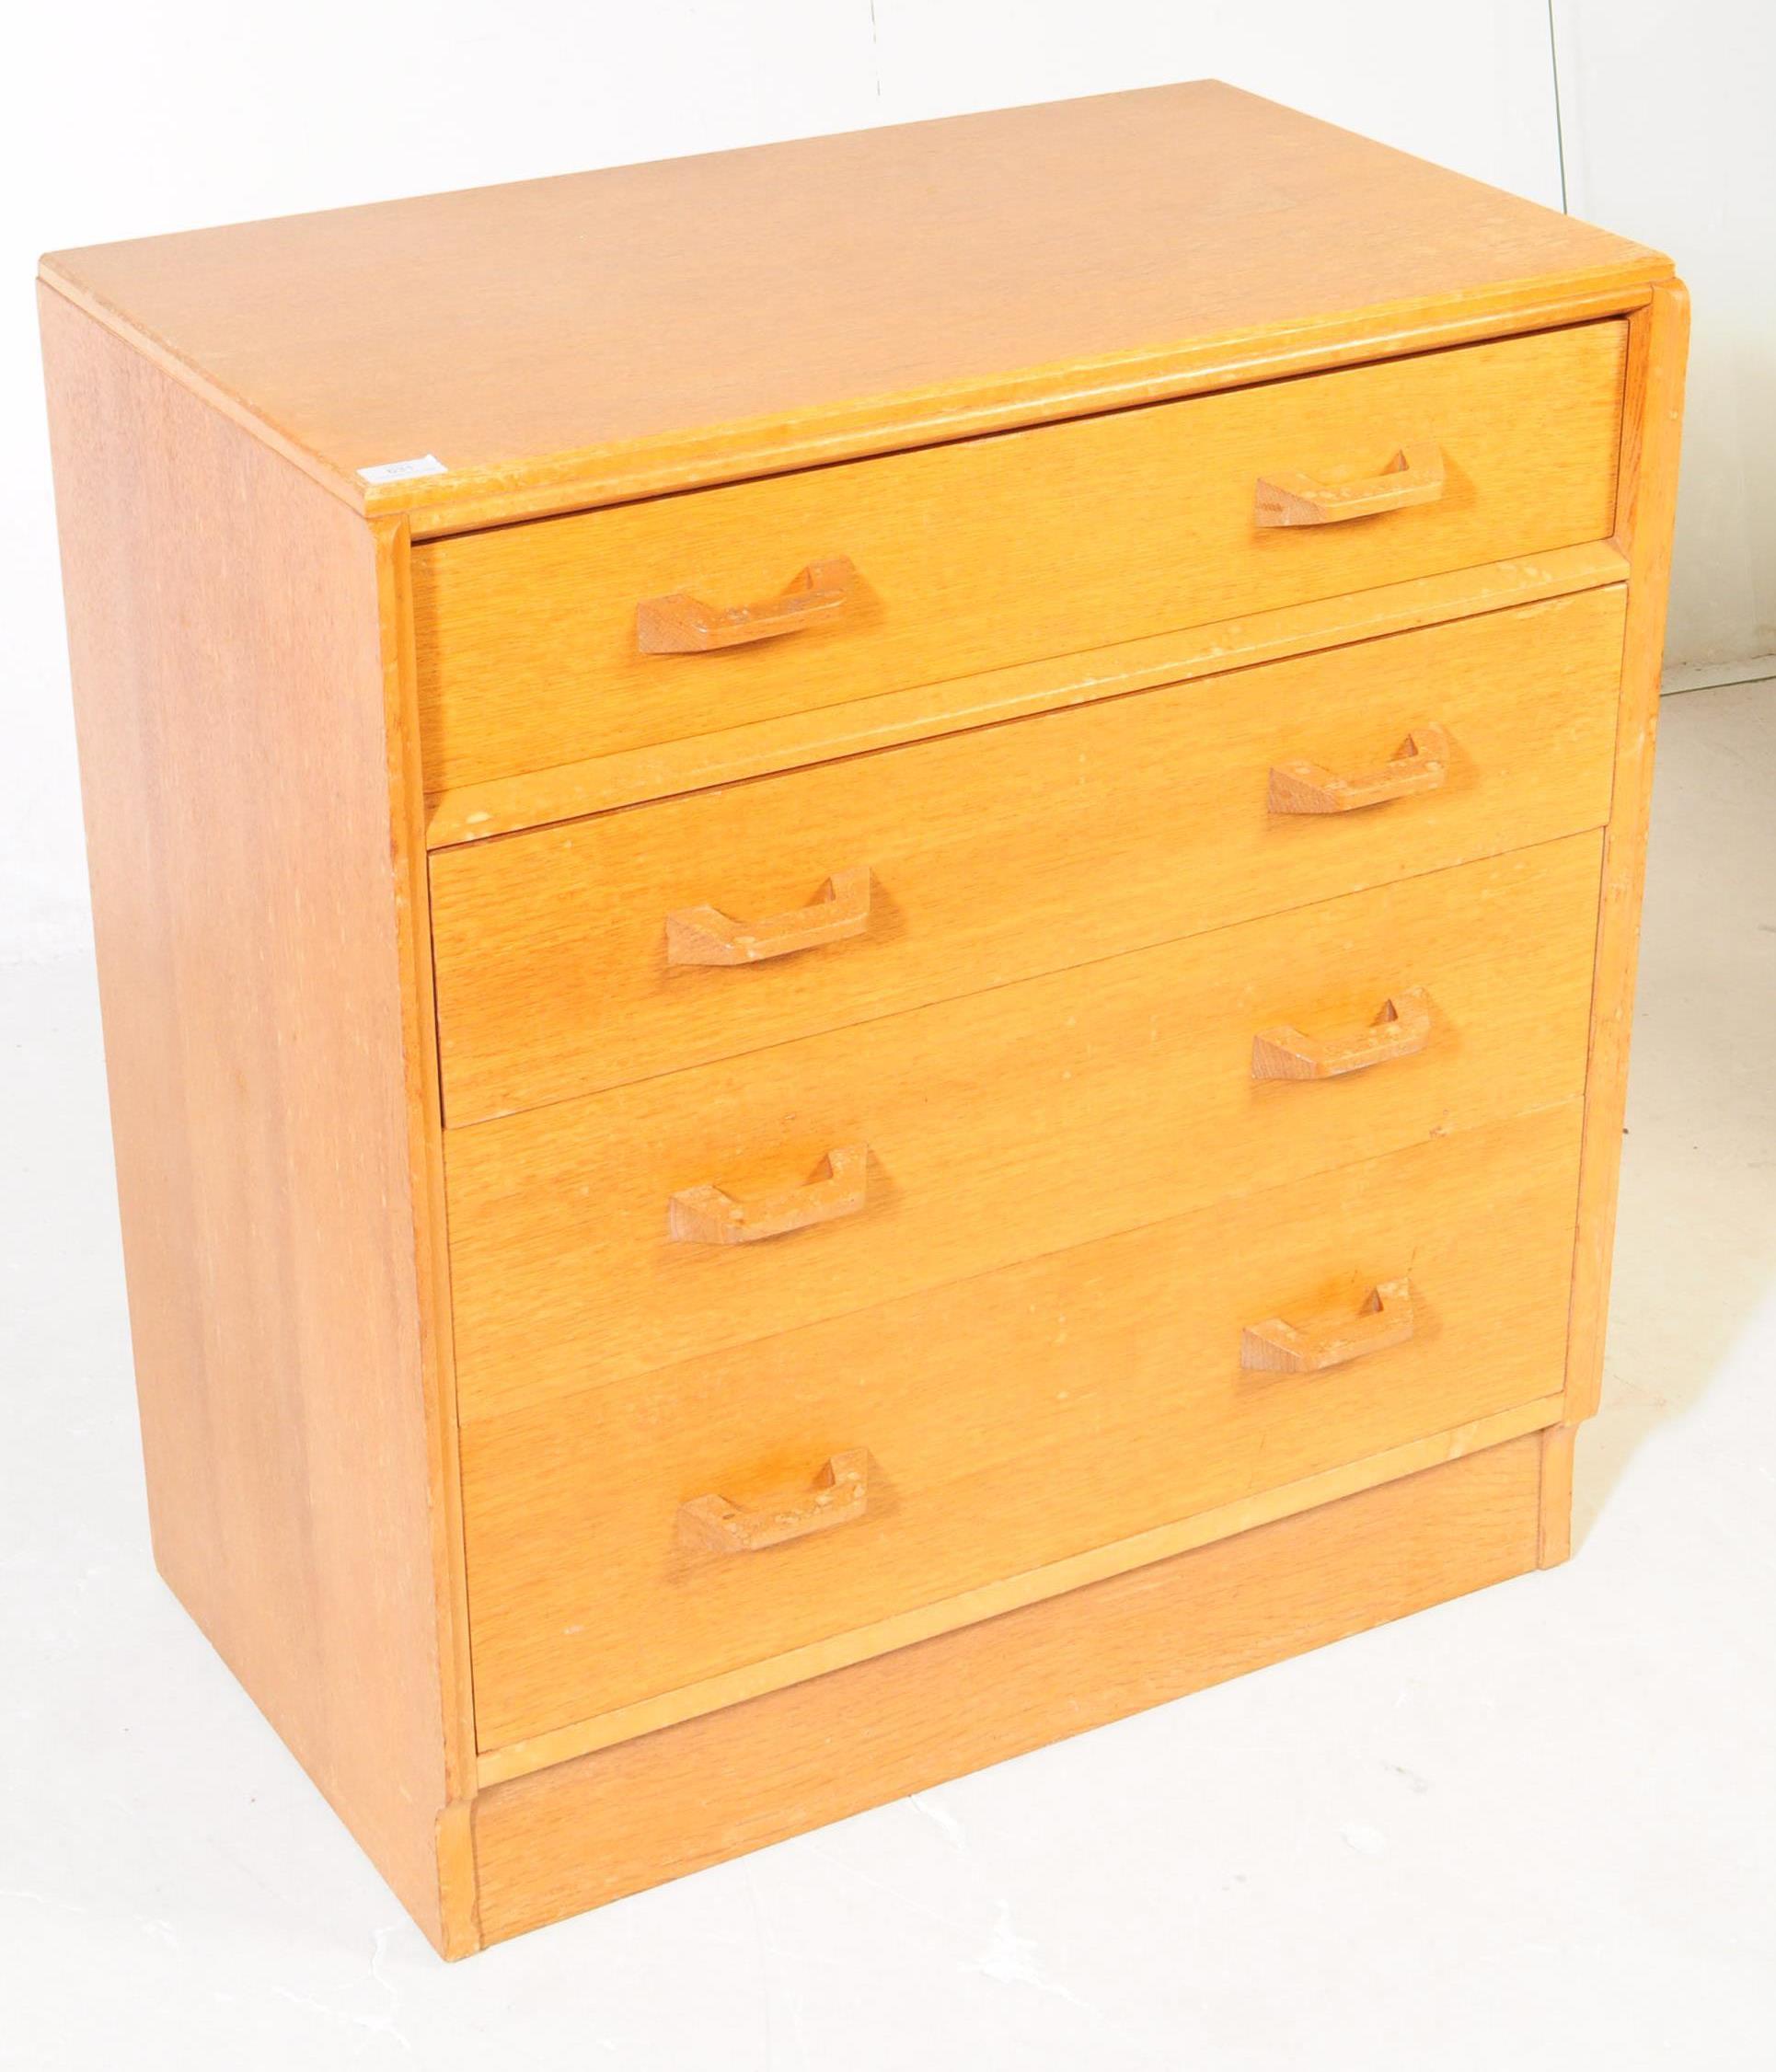 G-PLAN - E. GOMME - MID CENTURY BRANDON CHEST OF DRAWERS - Image 2 of 7